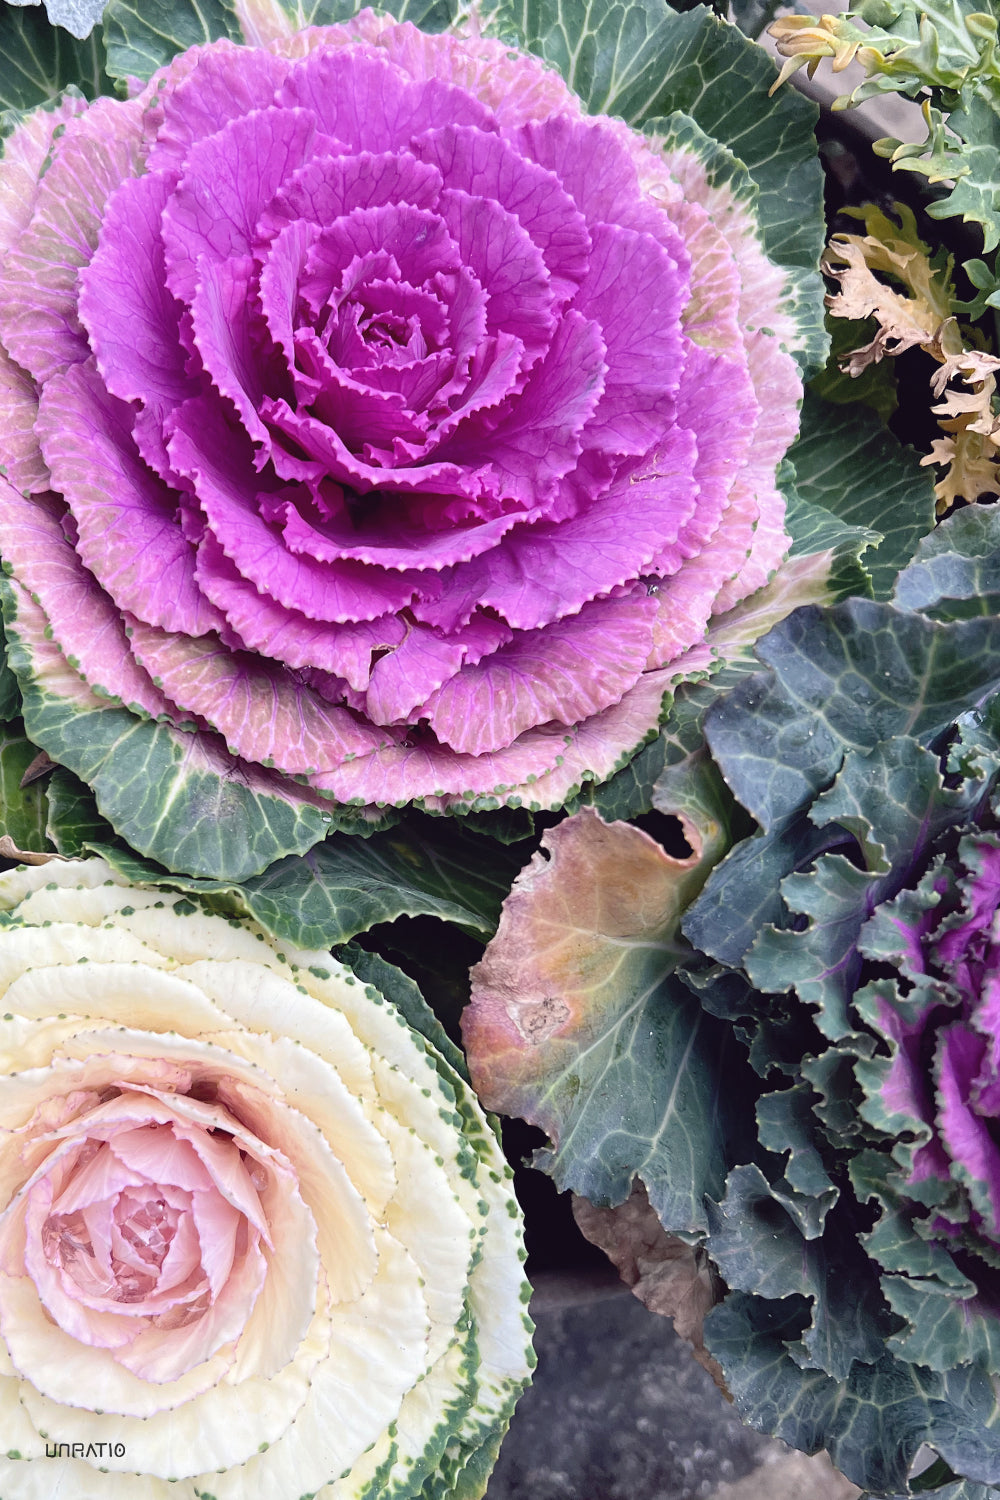 Close-up of a rich purple and cream ornamental cabbage duo with a delicate rosette pattern, highlighting natural winter flora in Japan."